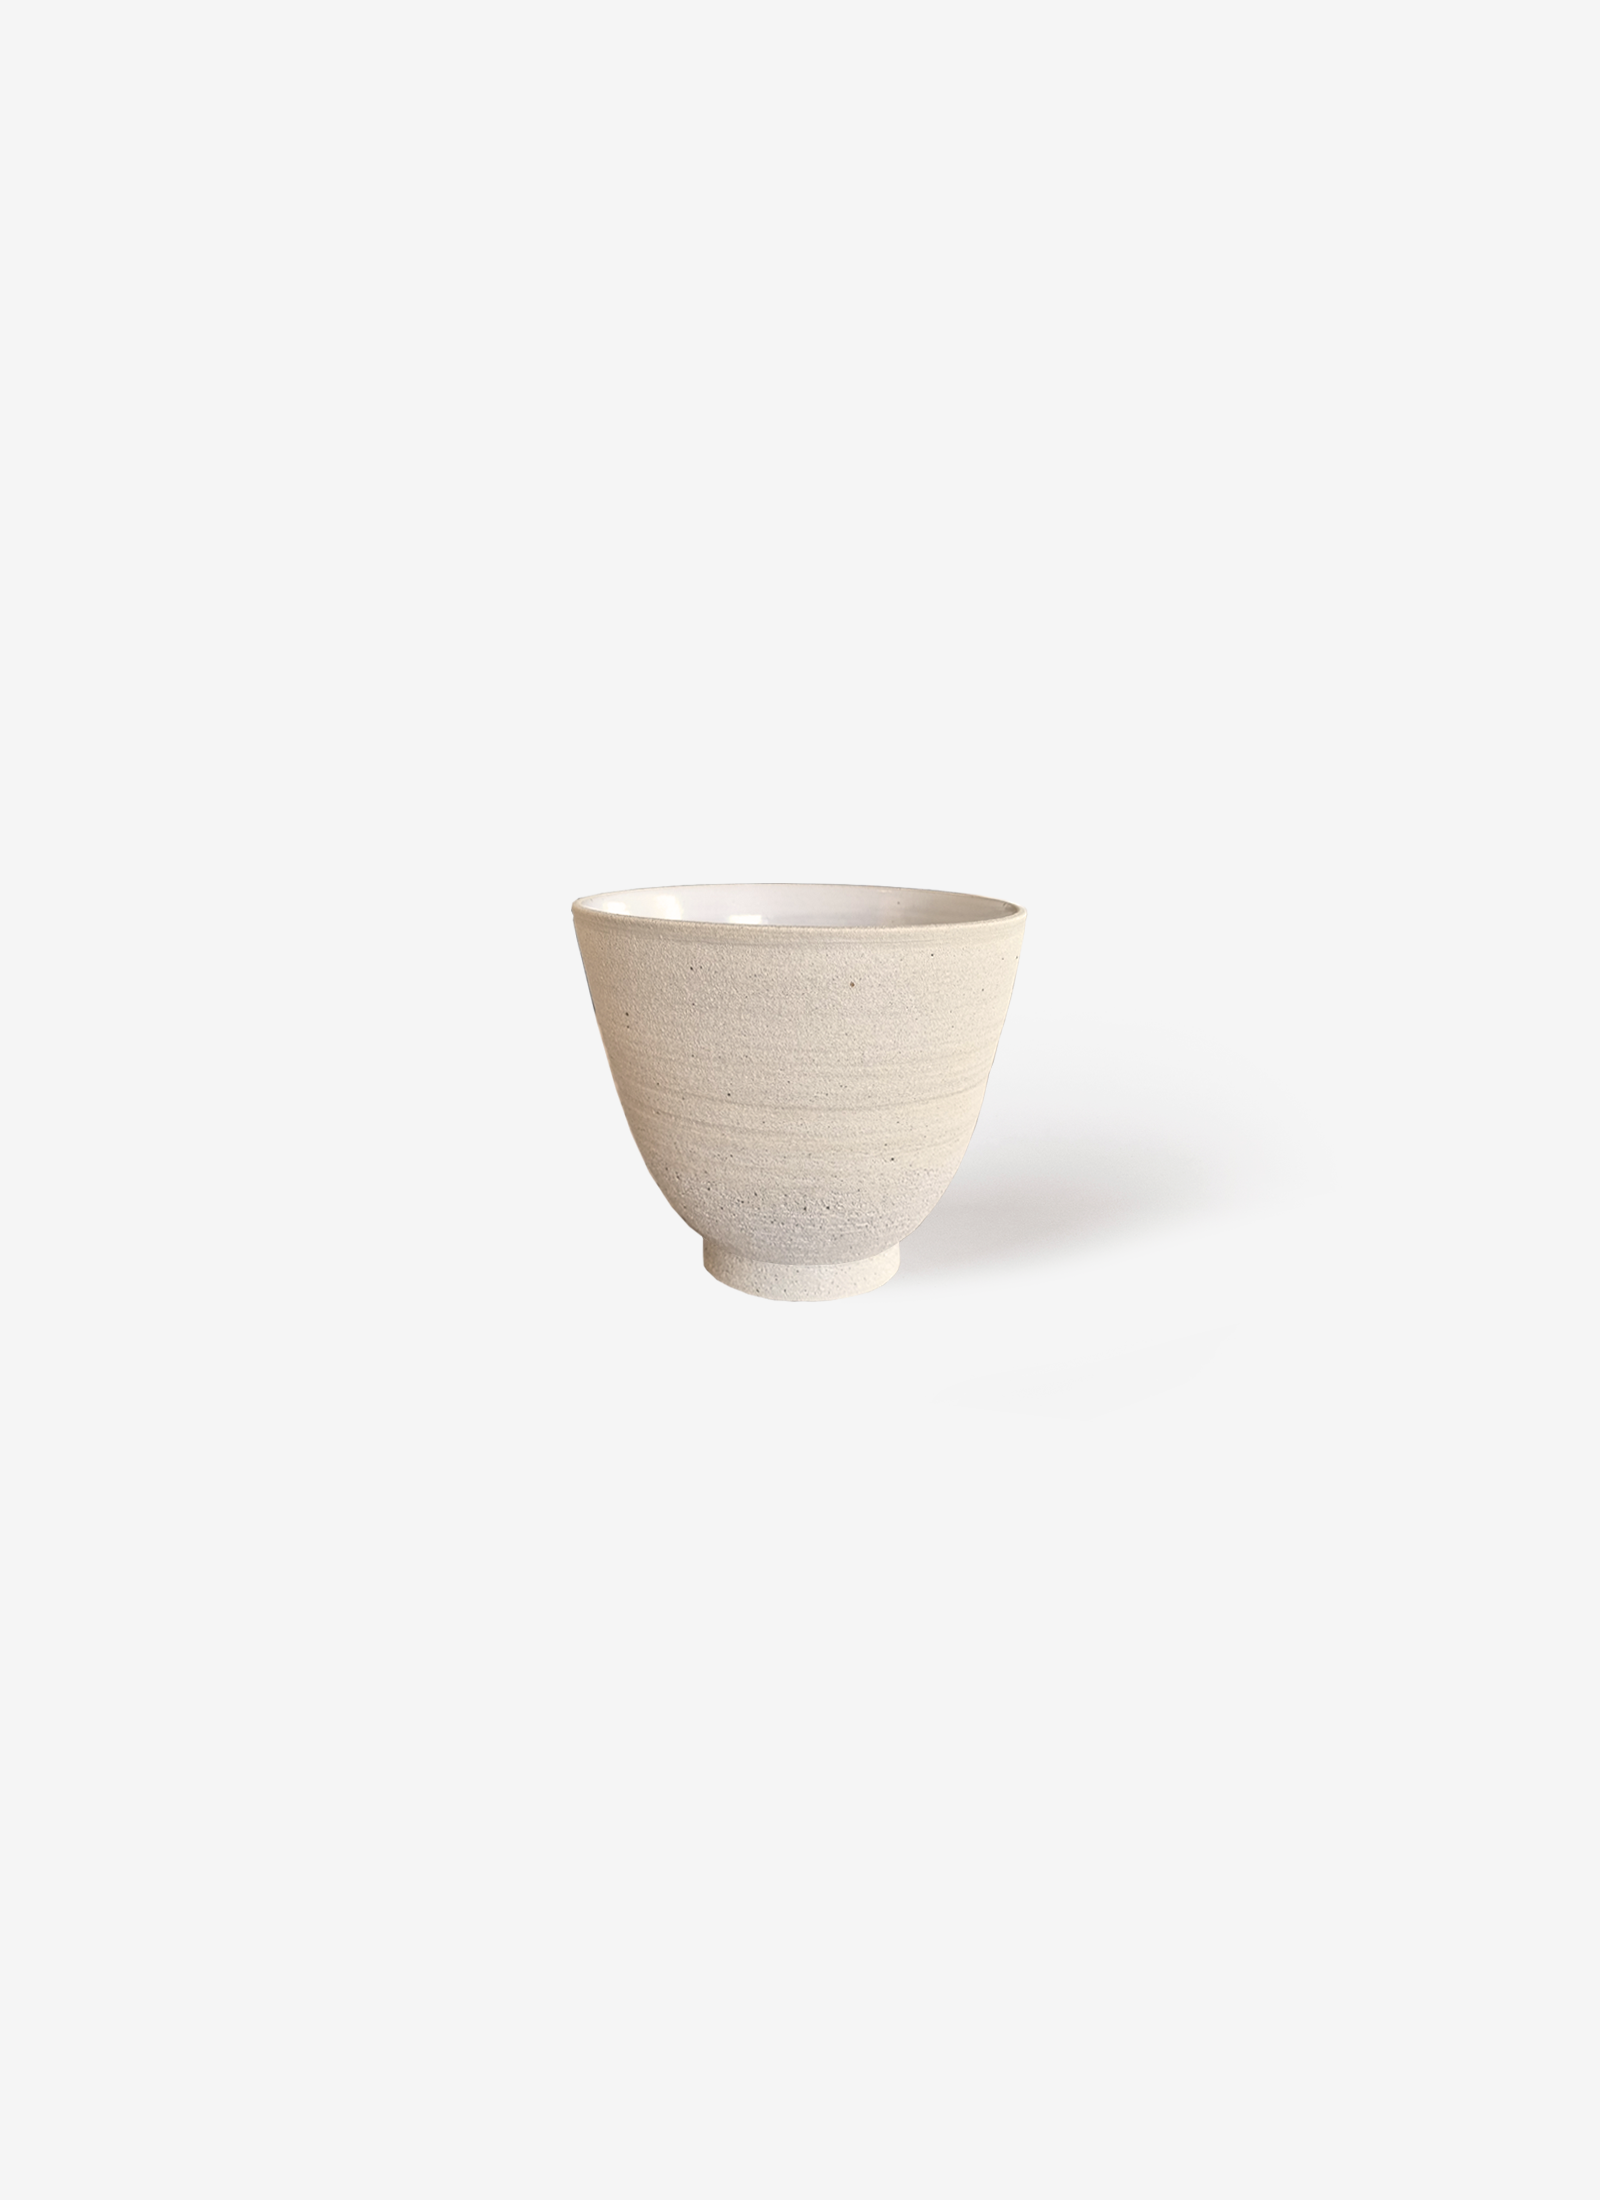 Rounded Bowls in Natural